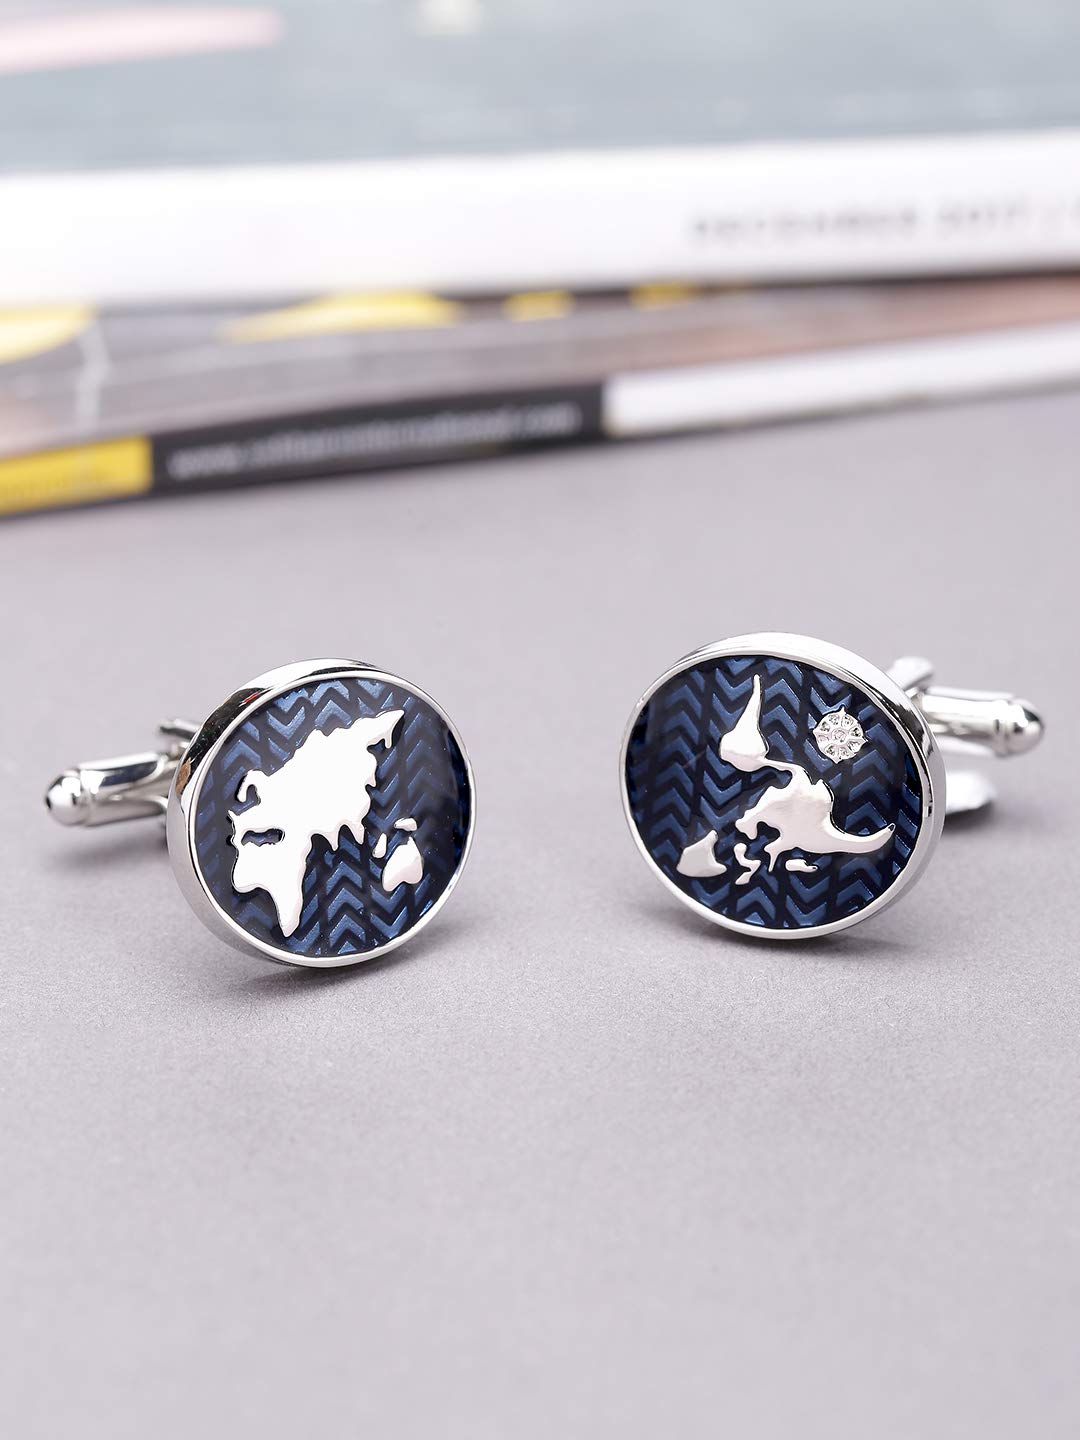 Yellow Chimes Cufflinks for Men and Boys Blue Cuff links | Formal Stainless Steel World Map Shaped Cufflink | Birthday Gift for Men and Boys Anniversary Gift for Husband